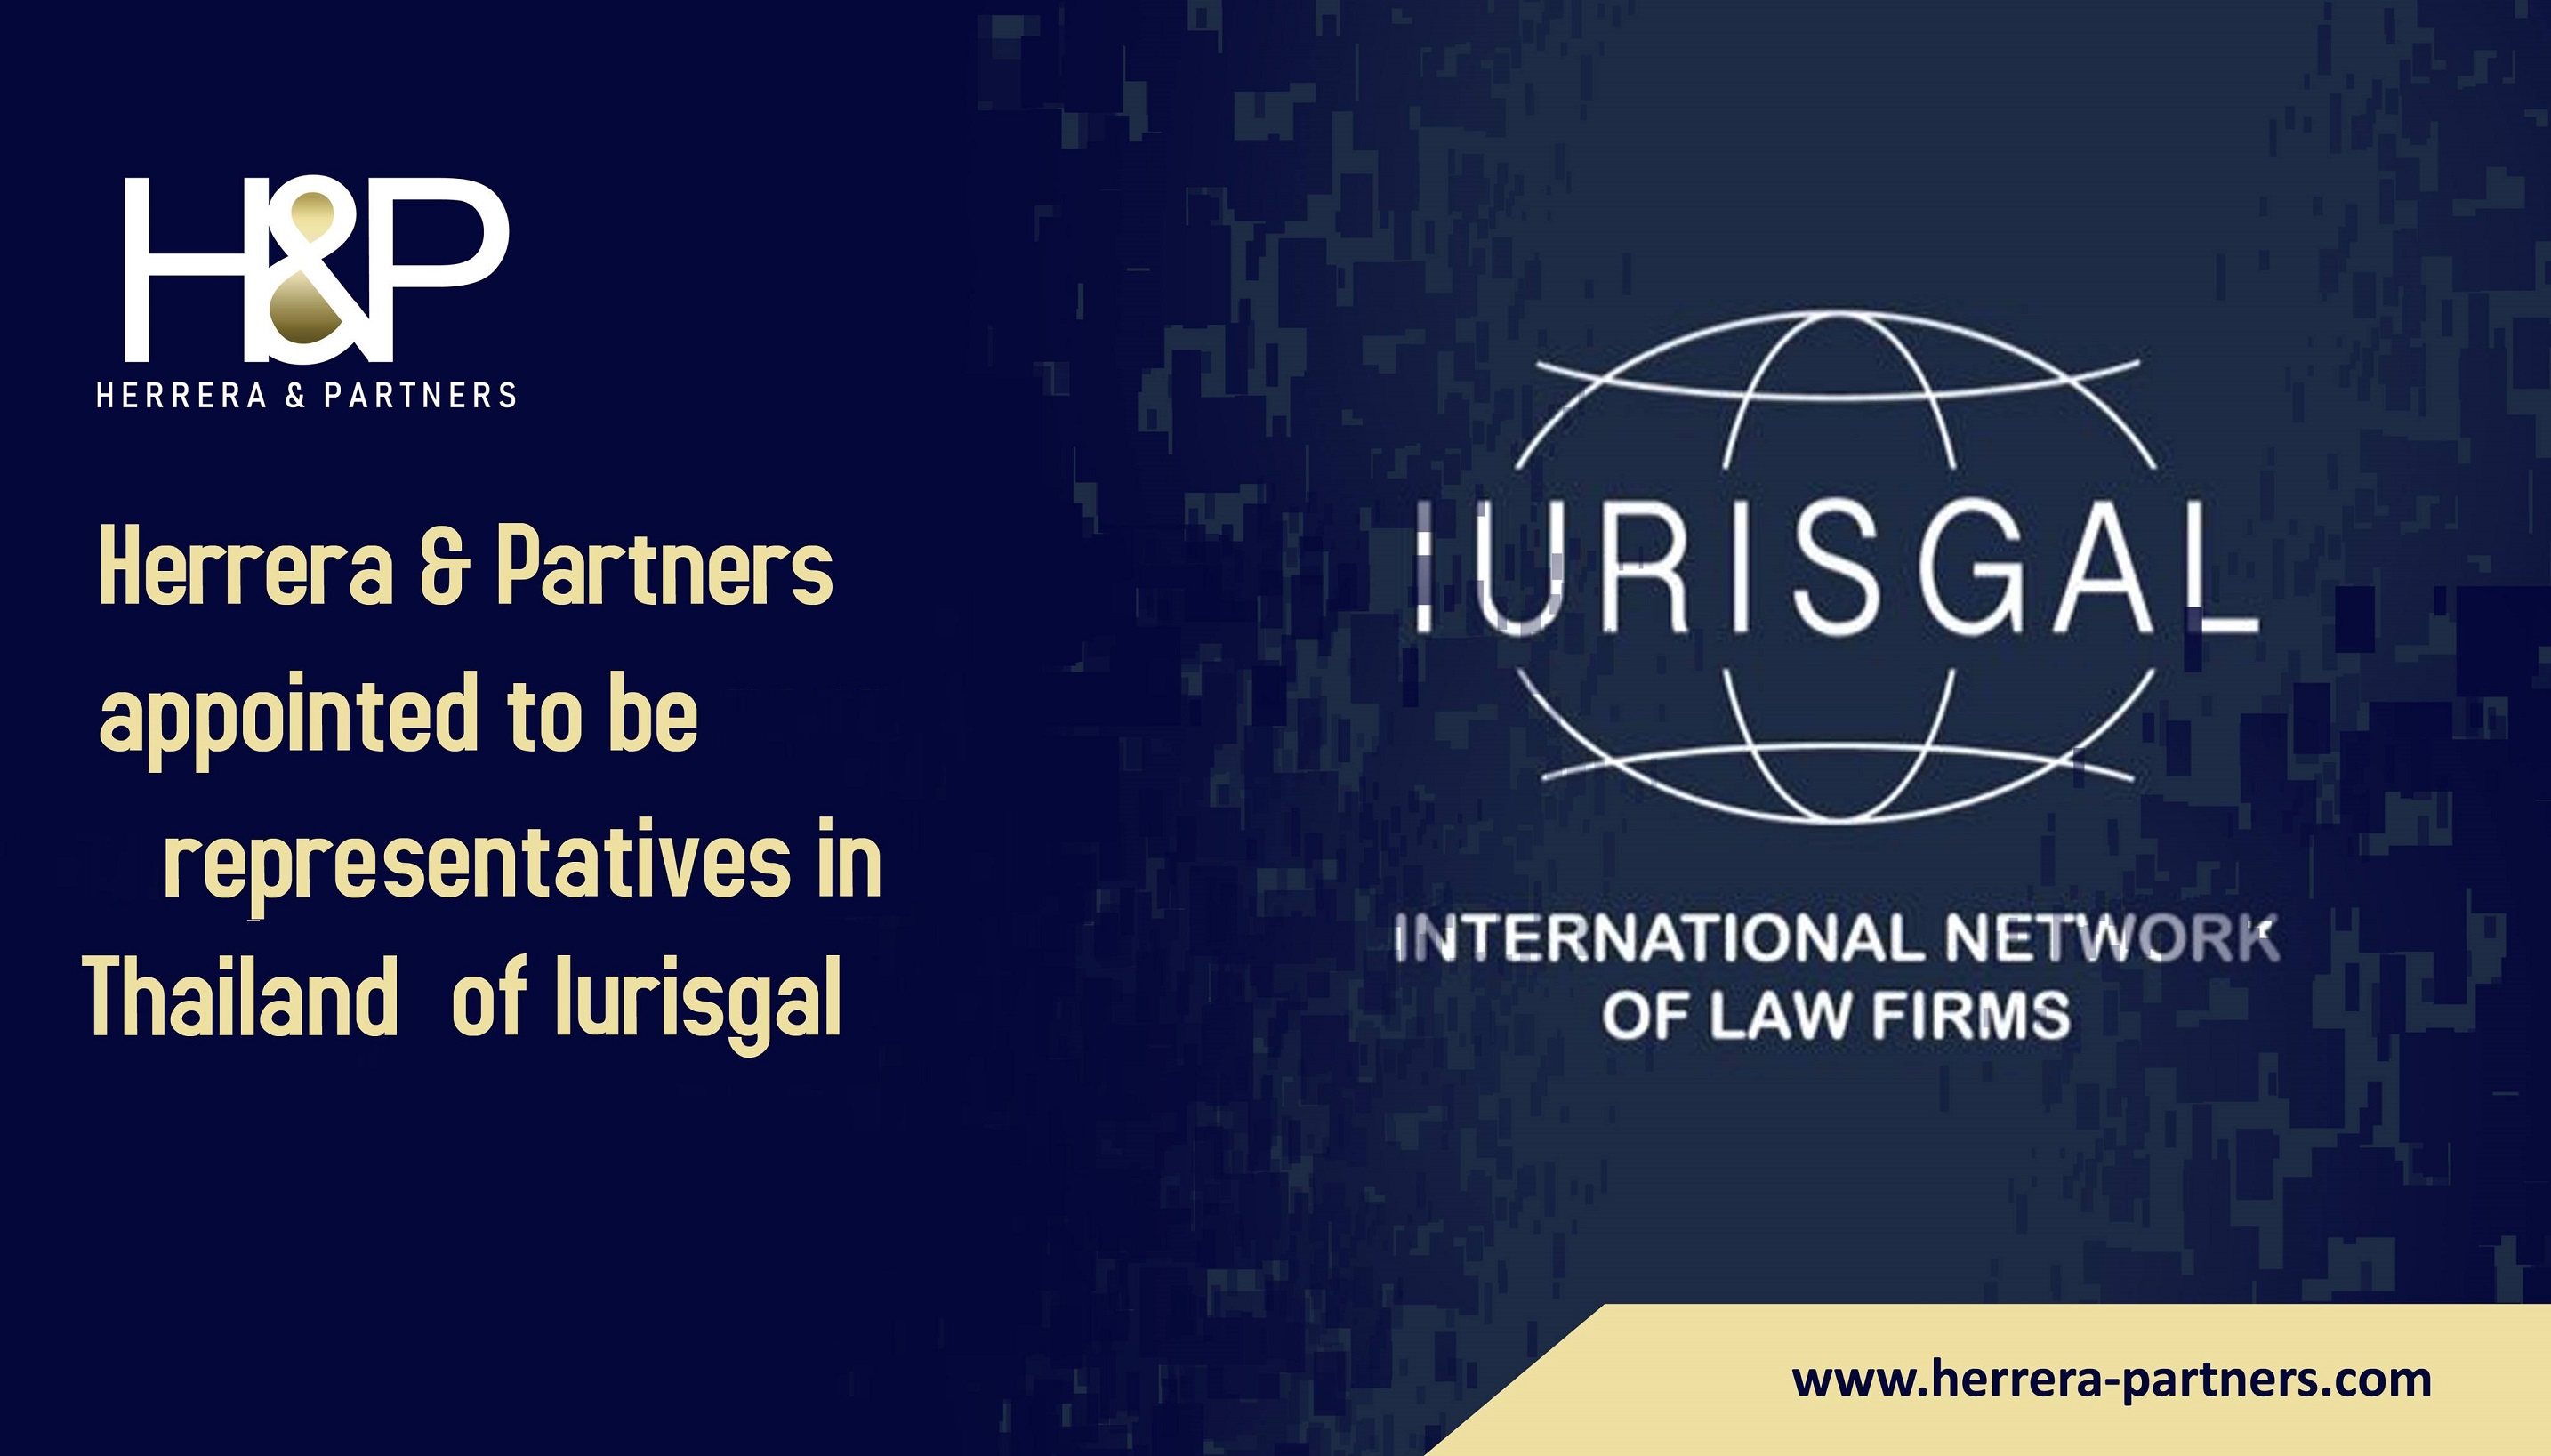 Herrera & Partners appointed to be representatives in Thailand of Iurisgal H&P leading law firm in Bangkok